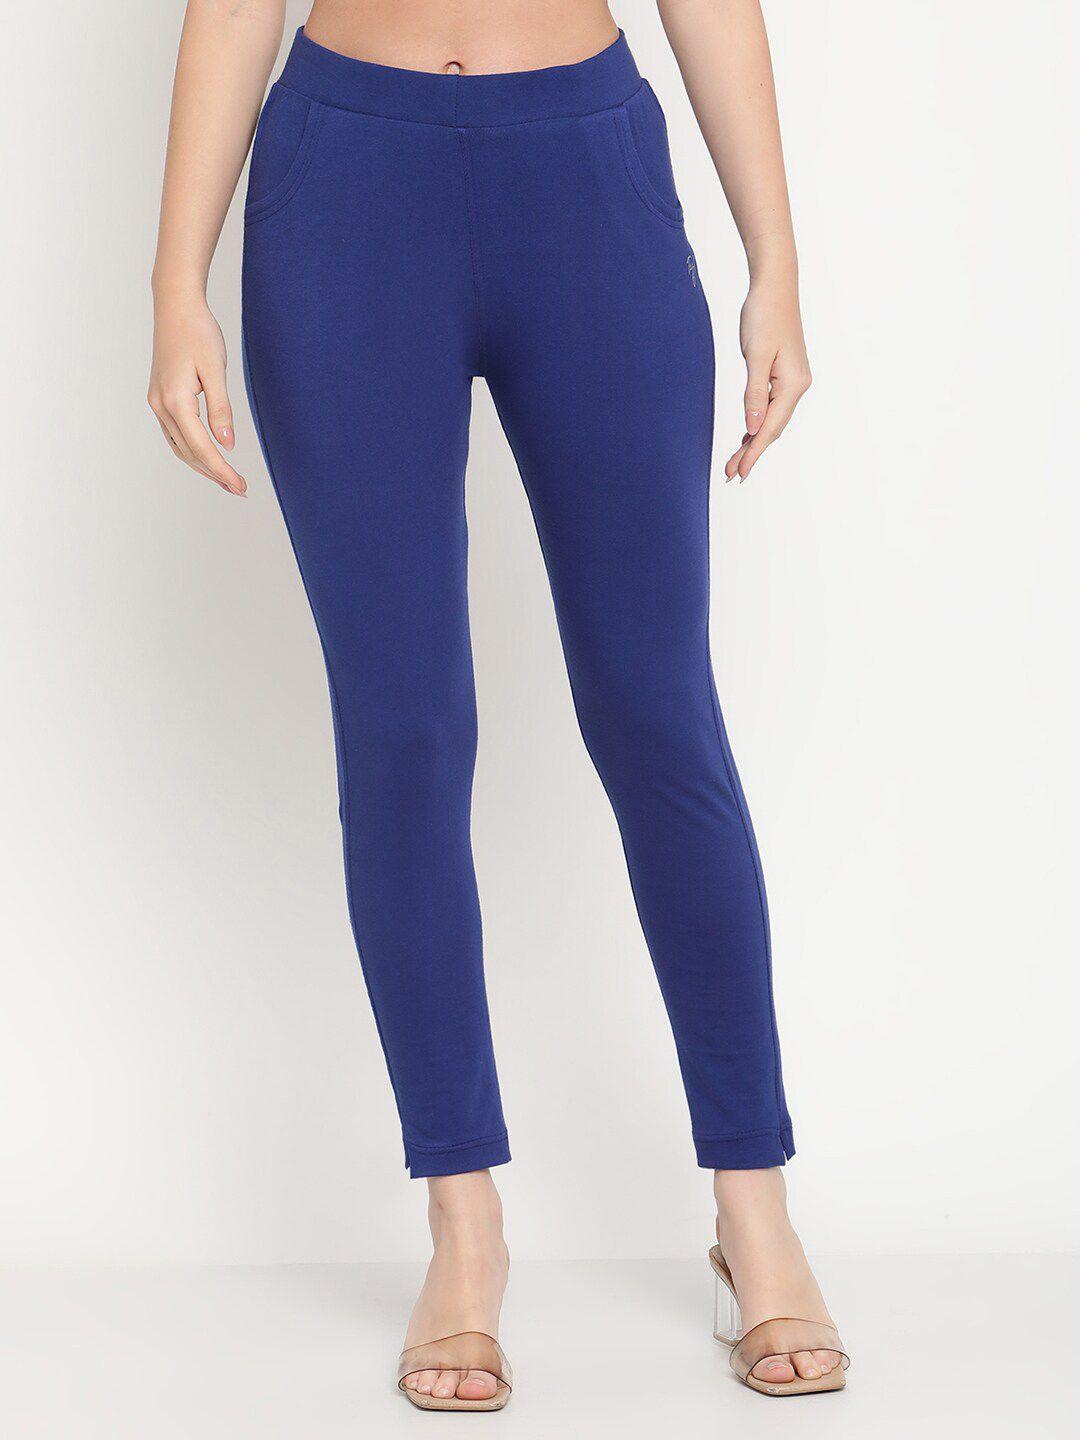 tag-7-women-blue-solid-jeggings